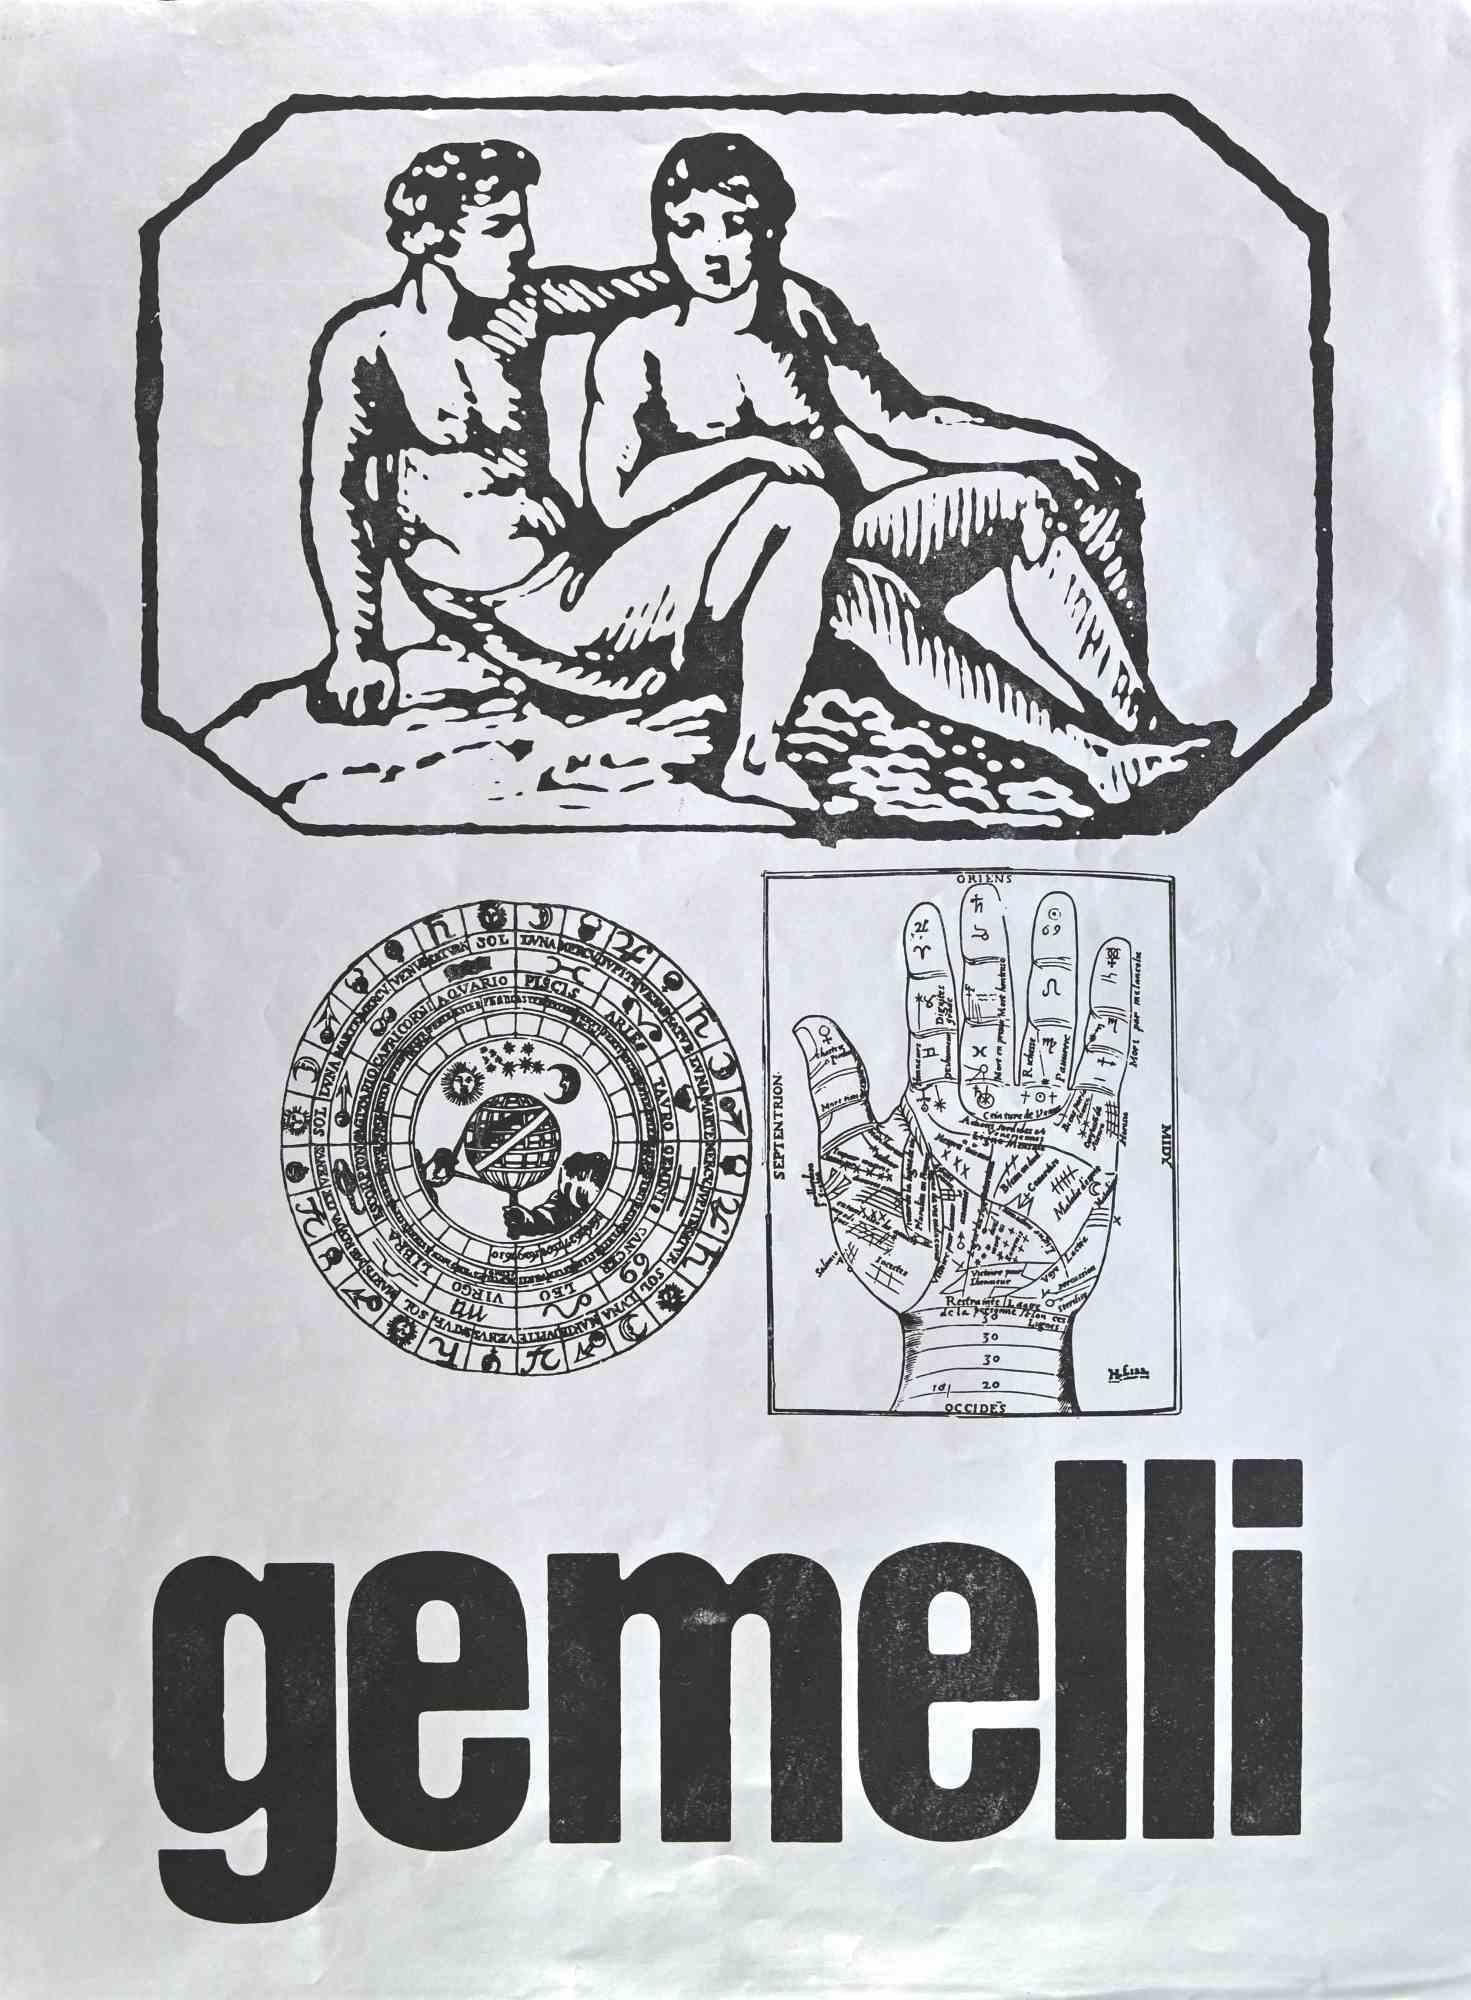 Gemini  is a screen print on grey paper realized by  Sergio Barletta in 1973. 

68 x 49 cm.

Good conditions!

 

Sergio Barletta  (1934) is an Italian cartoonist and illustrator, who has also published some humorous and political satire books. From